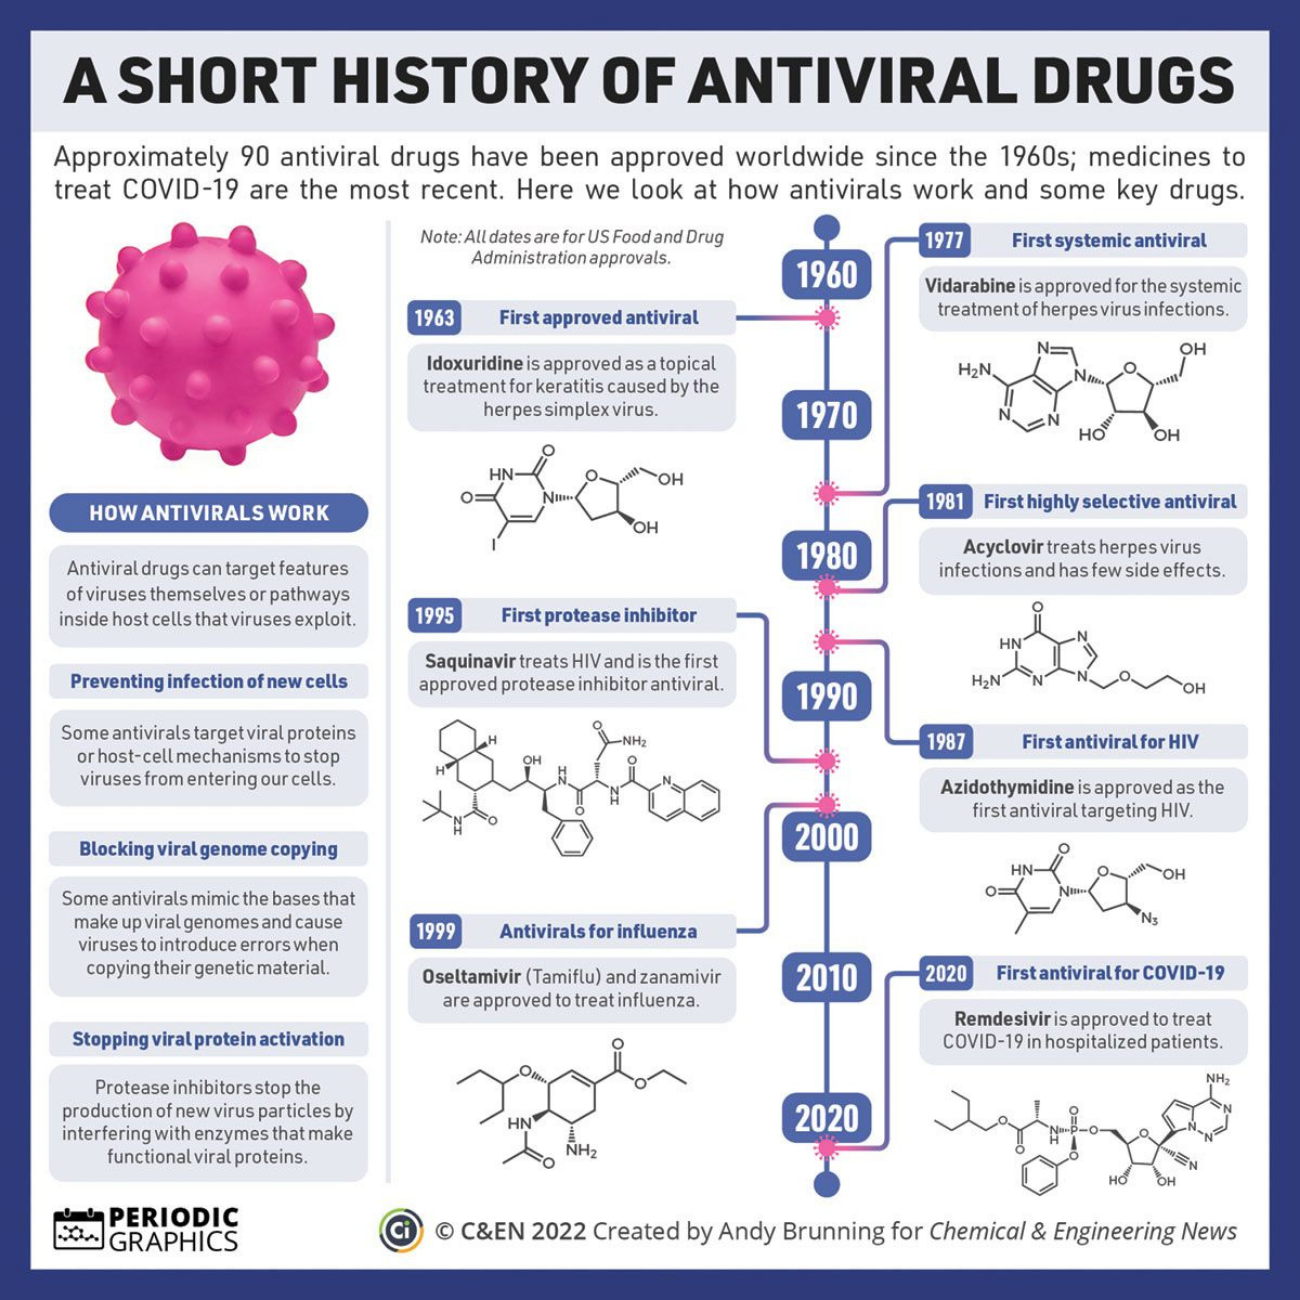 A history of antiviral drugs and how they work.